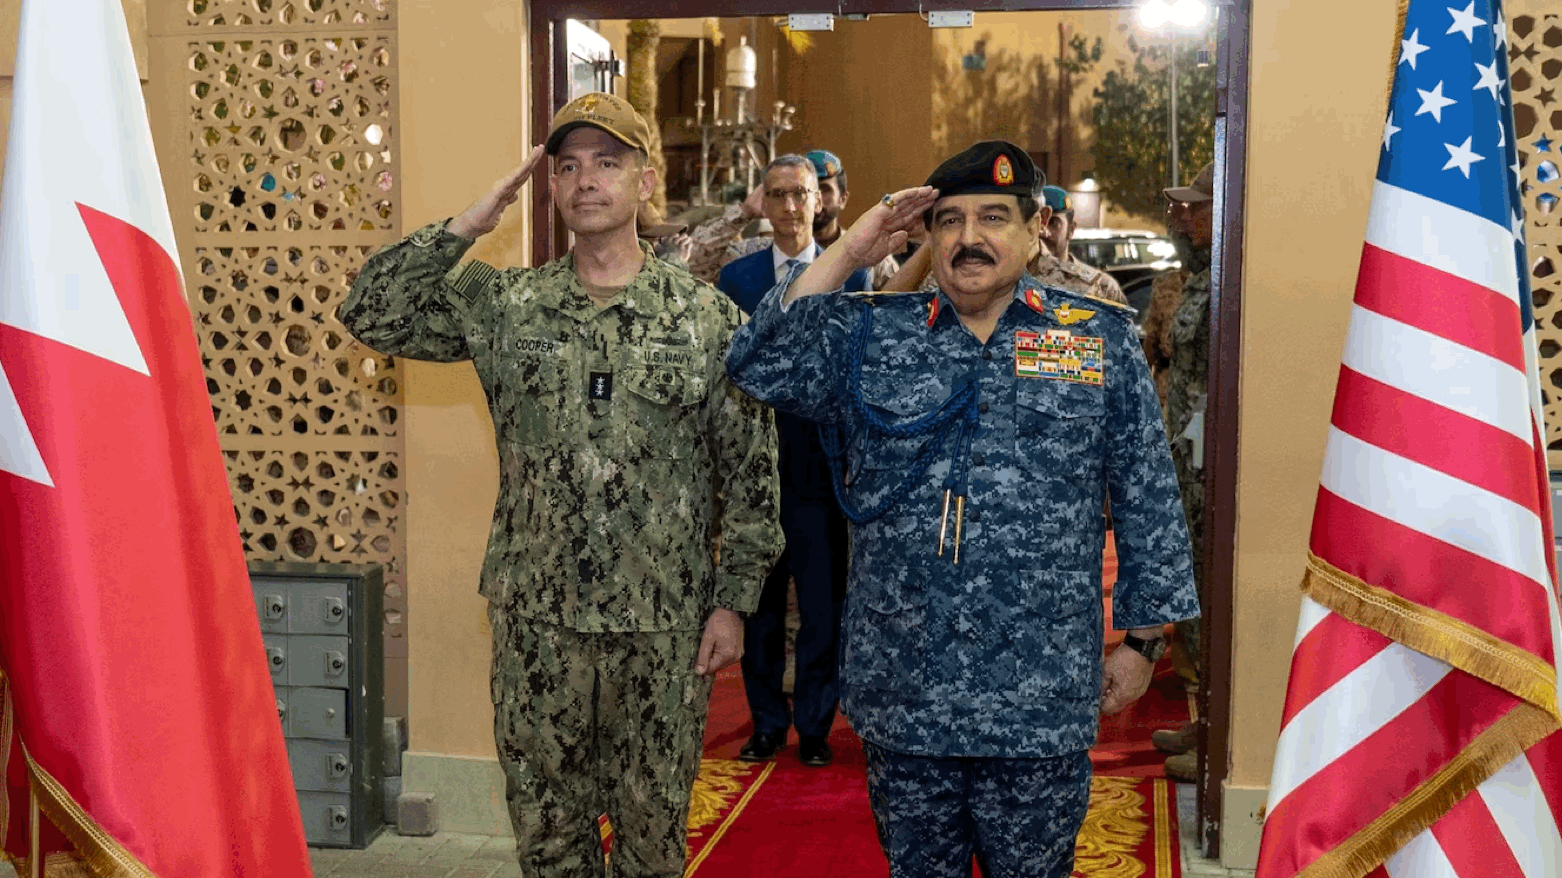 His Majesty King Hamad bin Isa Al Khalifa, King of the Kingdom of Bahrain and Supreme Commander of the Armed Forces, visited U.S. 5th Fleet headquarters in Bahrain, April 16, 2023 (U.S. Naval Forces Central Command Public Affairs)